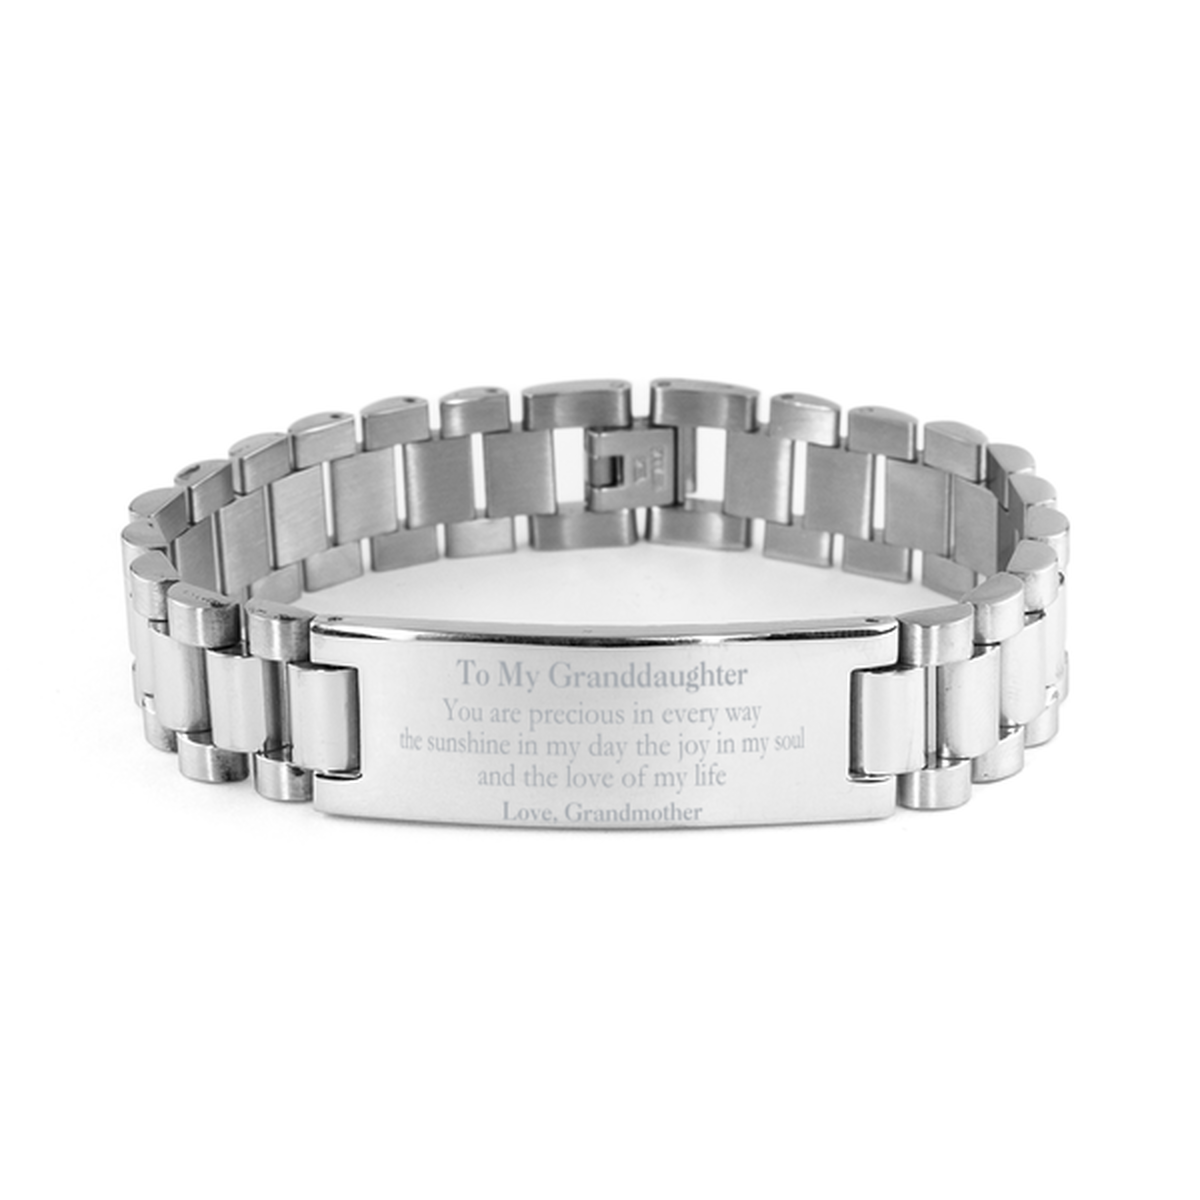 Graduation Gifts for Granddaughter Ladder Stainless Steel Bracelet Present from Grandmother, Christmas Granddaughter Birthday Gifts Granddaughter You are precious in every way the sunshine in my day. Love, Grandmother